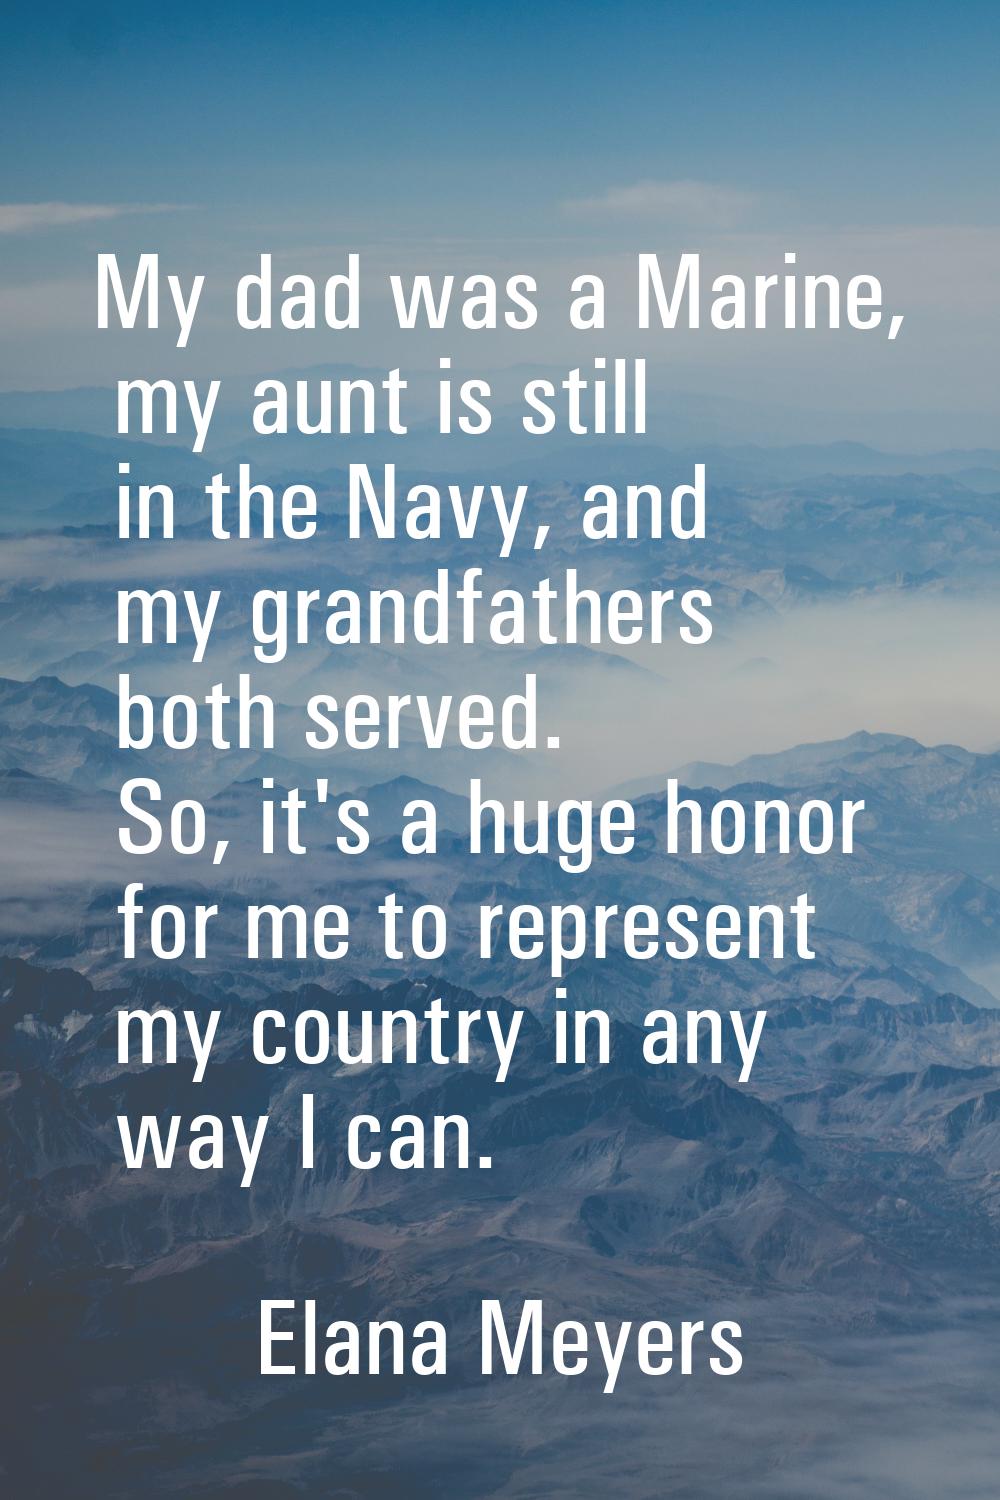 My dad was a Marine, my aunt is still in the Navy, and my grandfathers both served. So, it's a huge